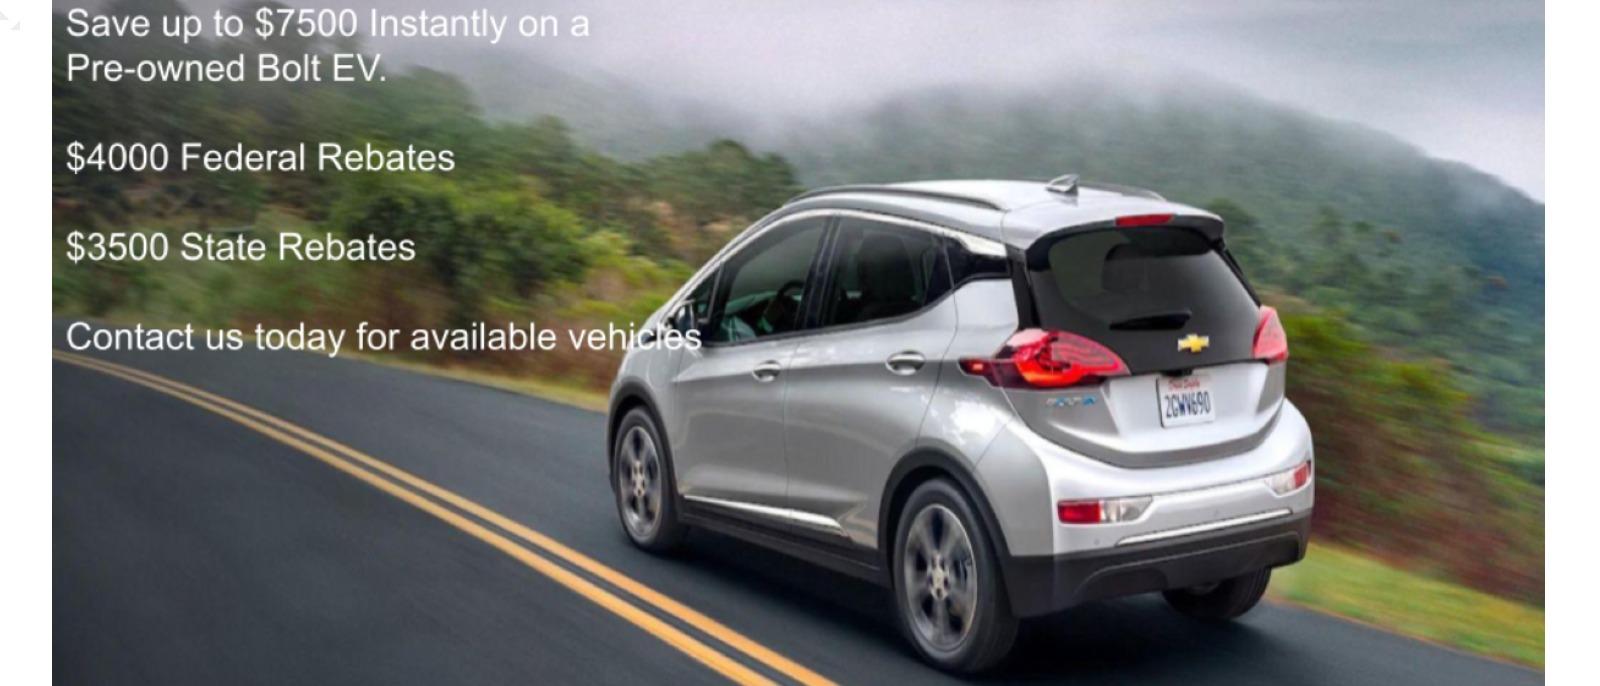 Save up to $7500 Instantly on a Pre-Owned Bolt EV.